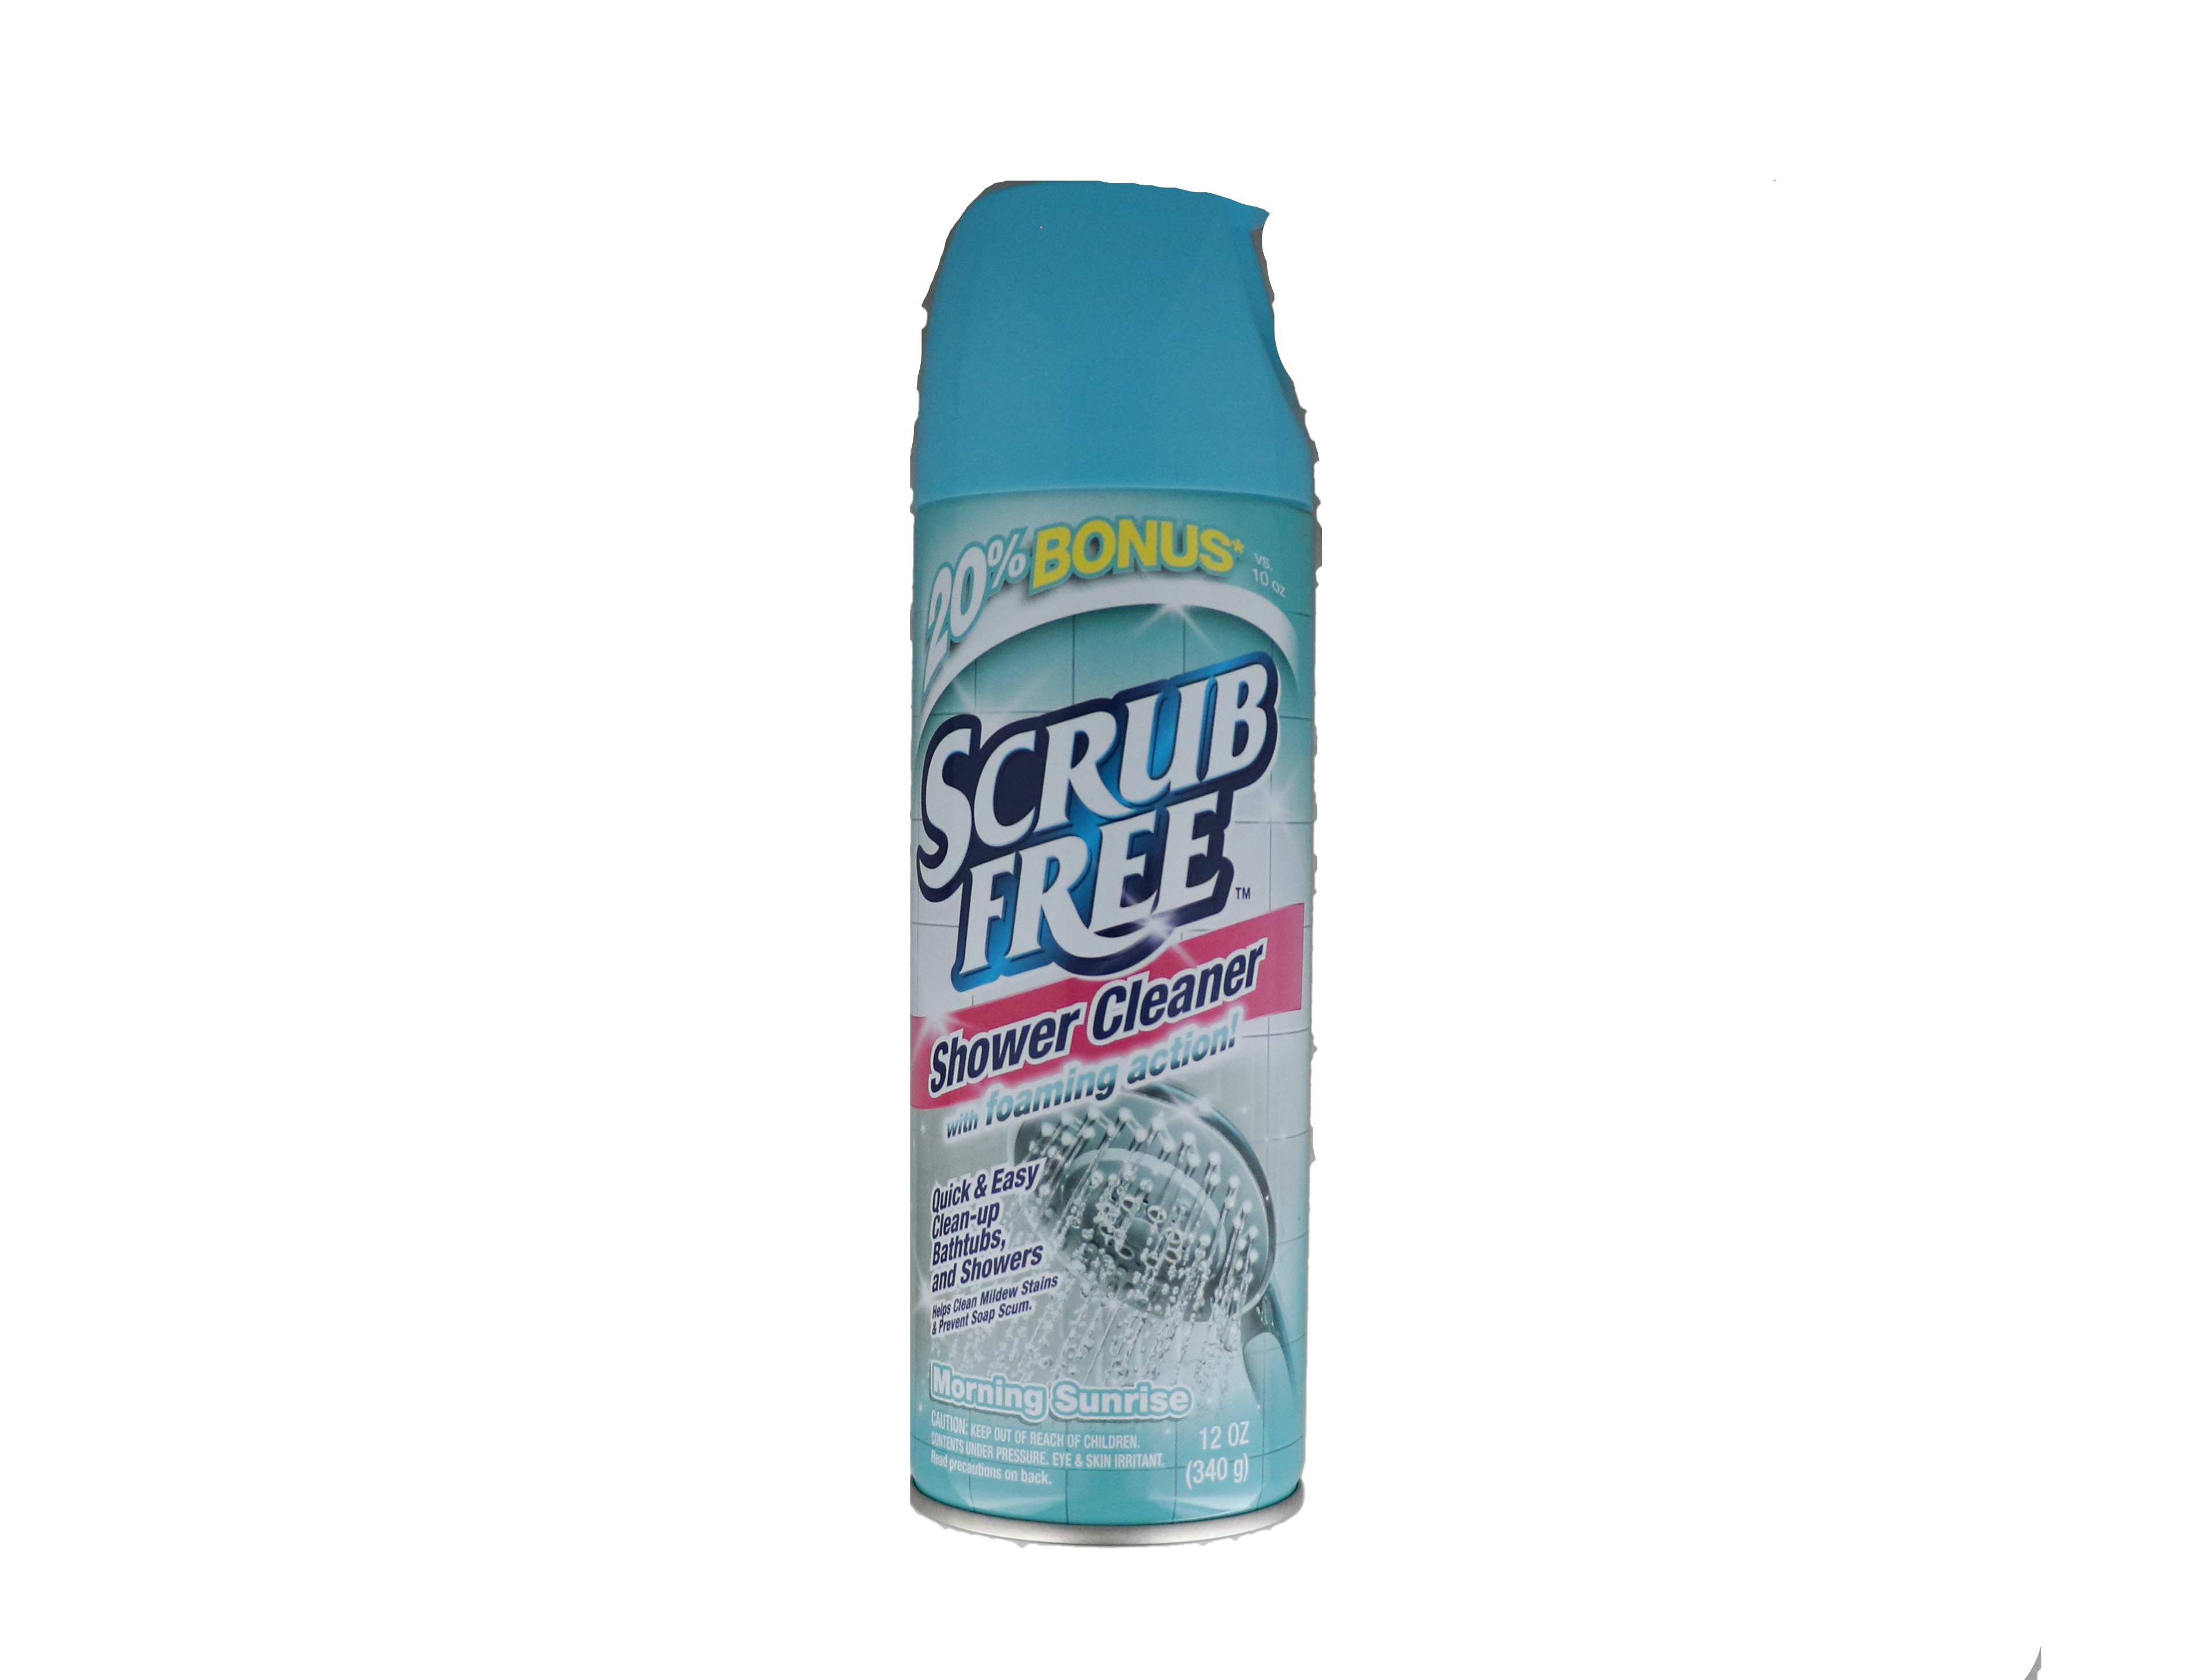 SCRUB FREE SHOWER CLEANER WITH FOAMING ACTION